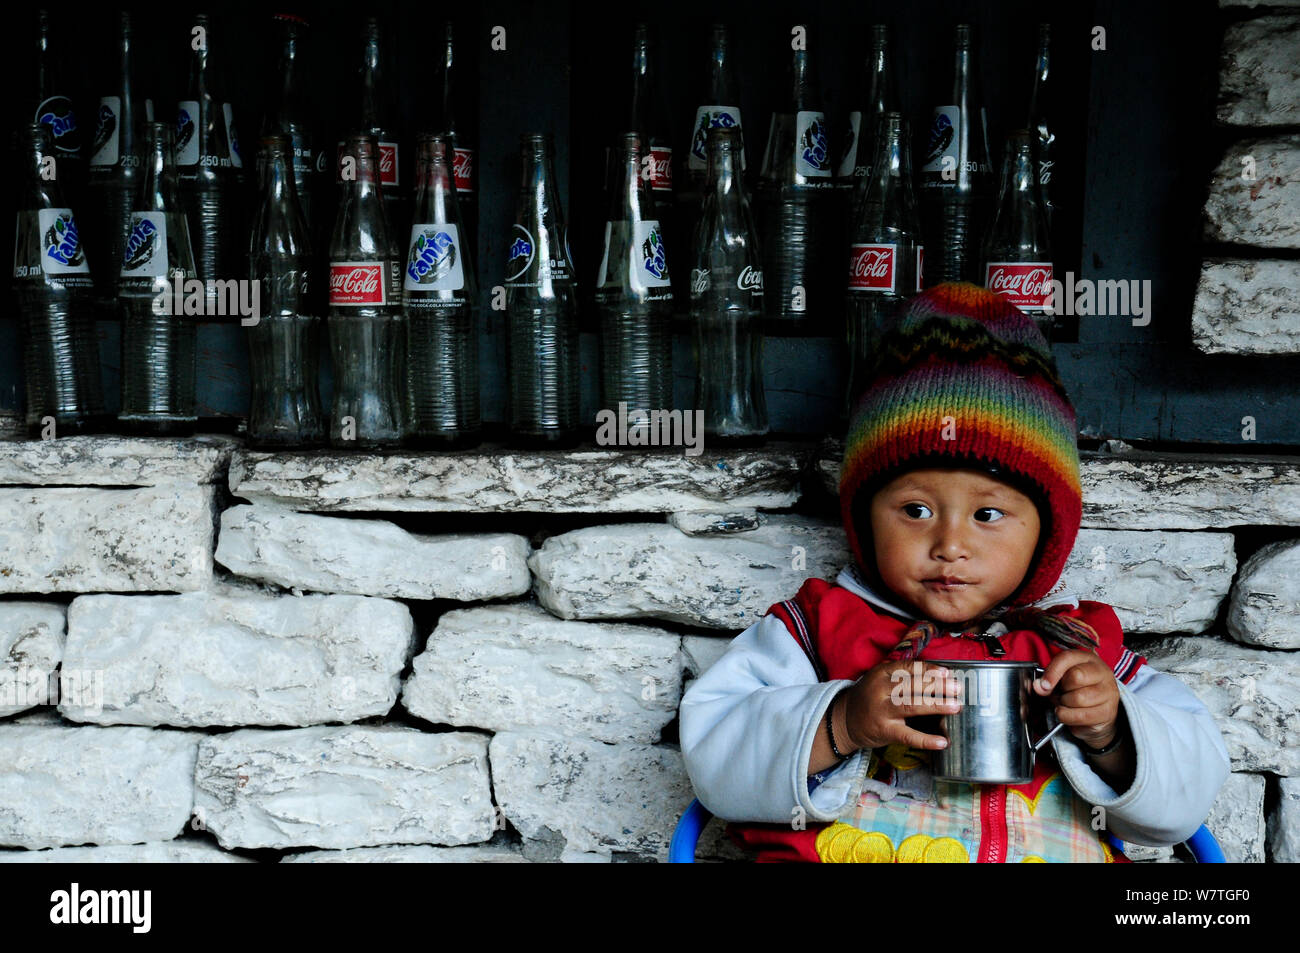 A child drinking by wall with empty glass bottles, in the small village of Khumnu. Annapurna Sanctuary, central Nepal, November 2011. Stock Photo